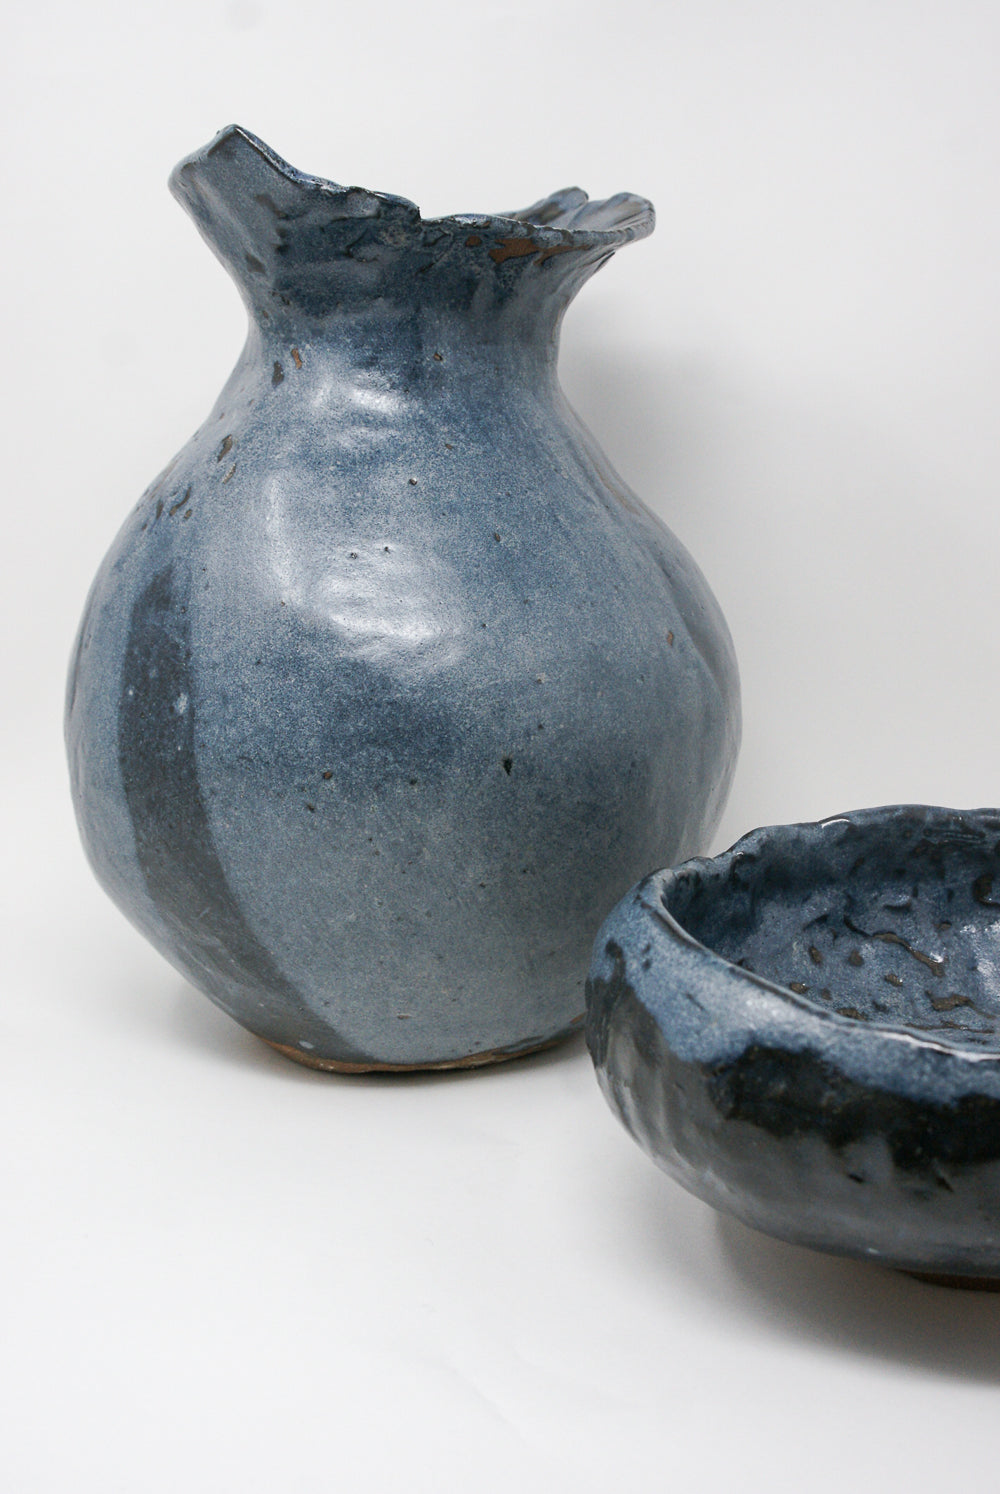 MONDAYS - Cloud-Blue Coiled Vessel in Blue Shino Glaze on Red Stoneware side view